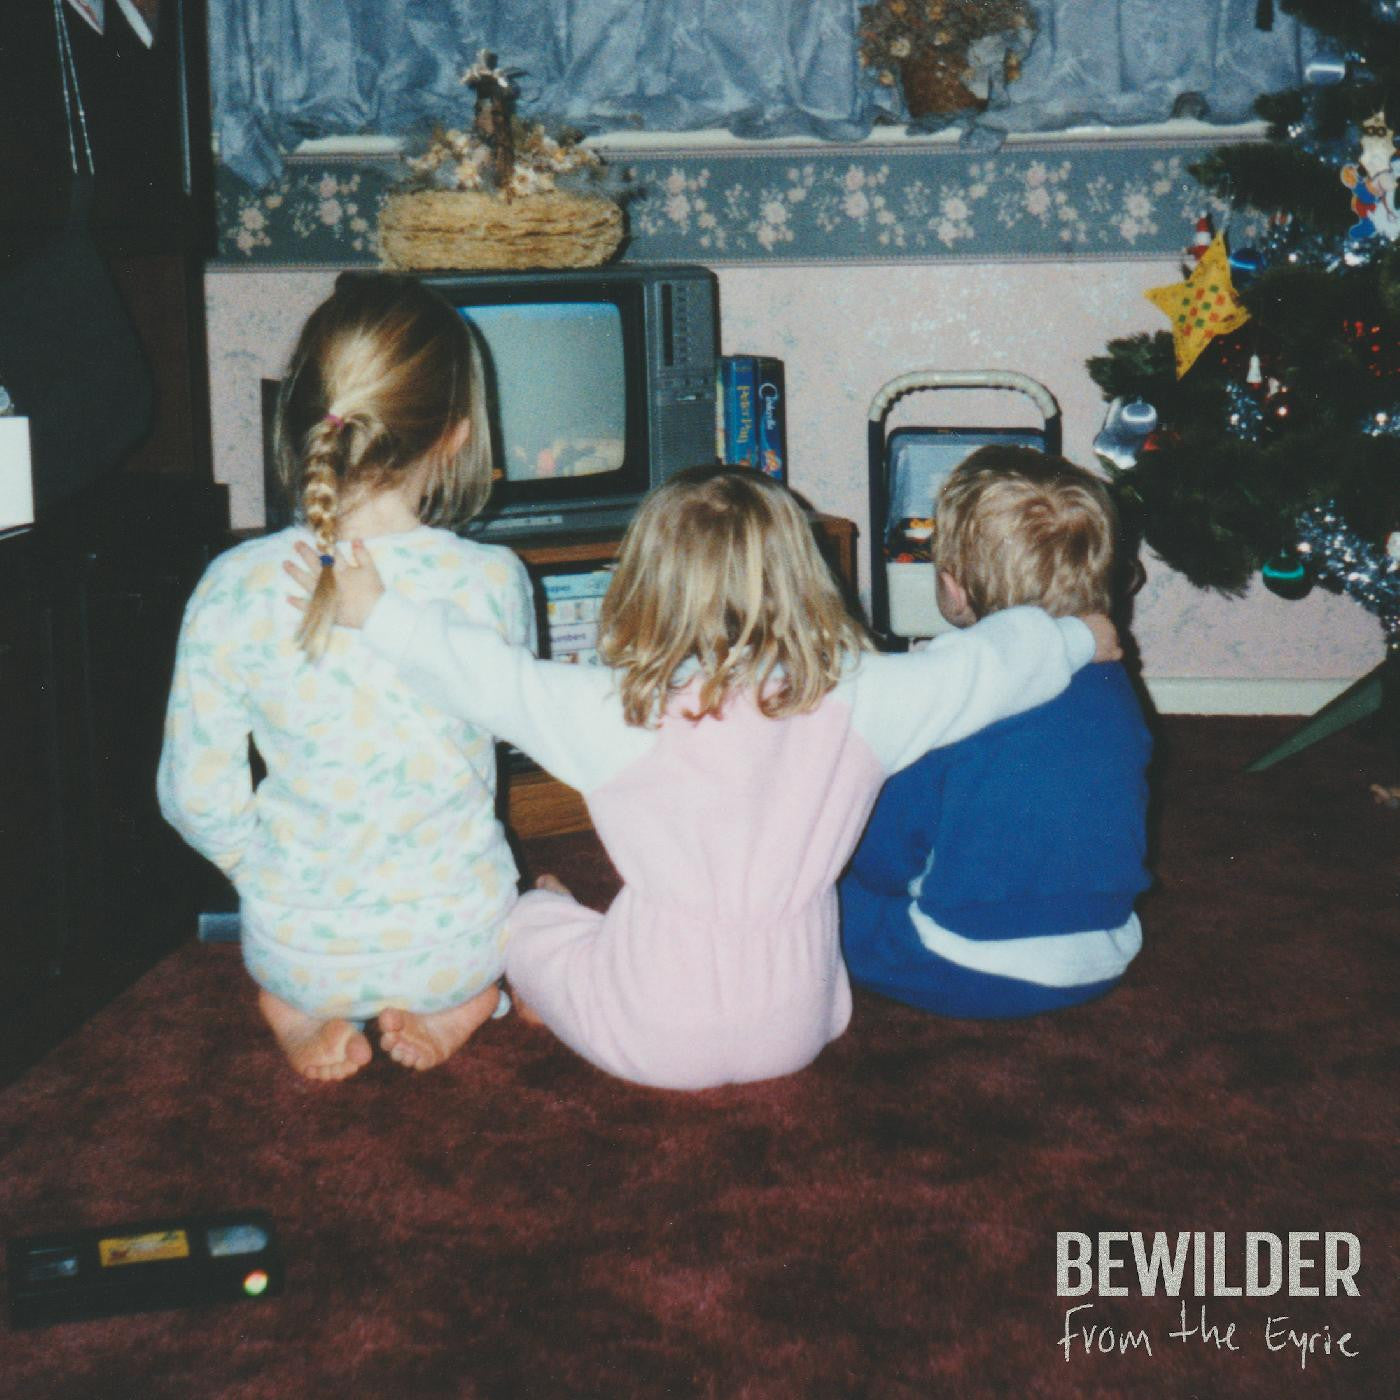 Bewilder - From The Eyrie [Maroon Vinyl]